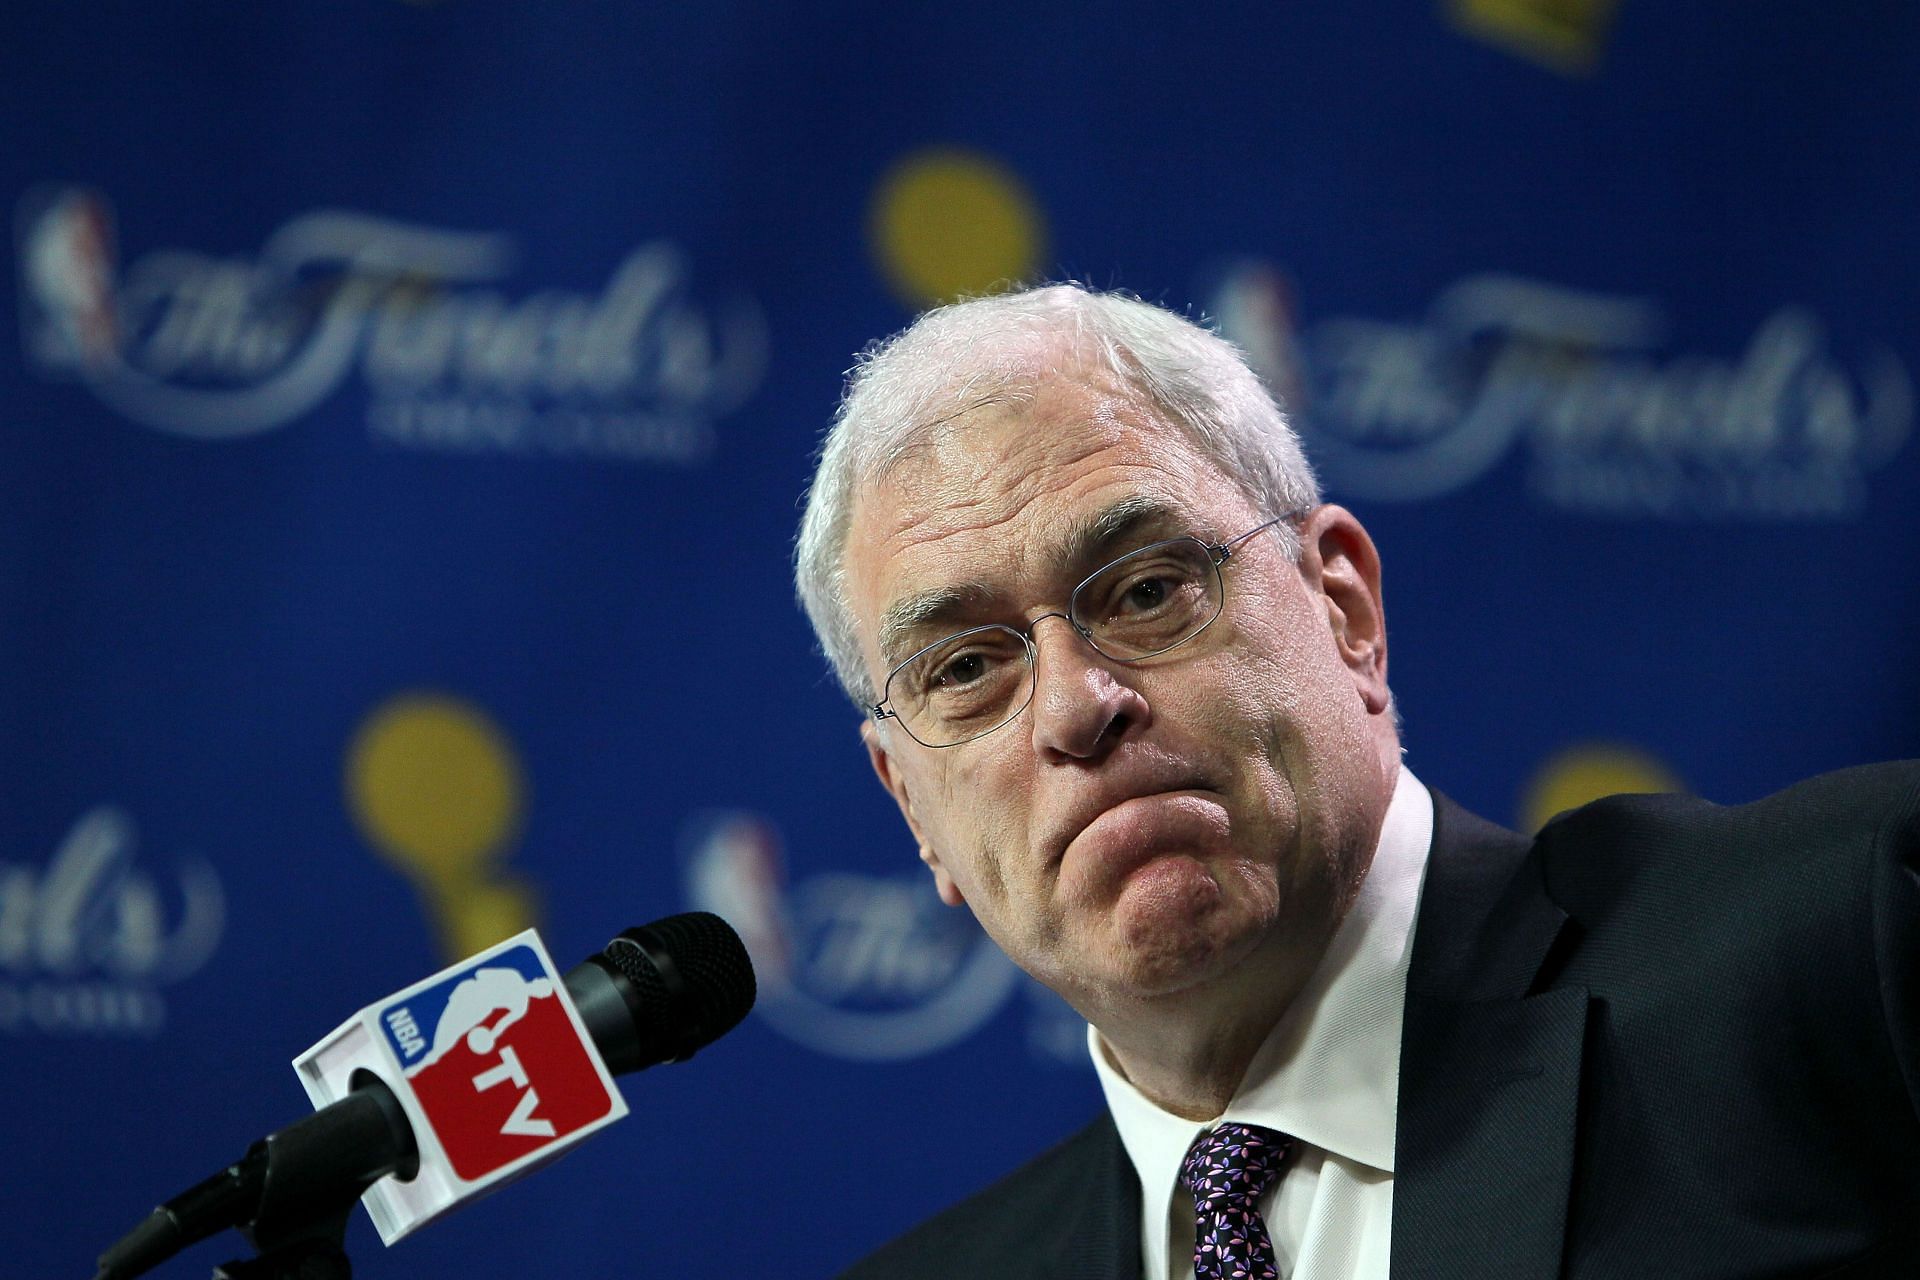 Head coach Phil Jackson of the LA Lakers during the 2010 NBA Finals